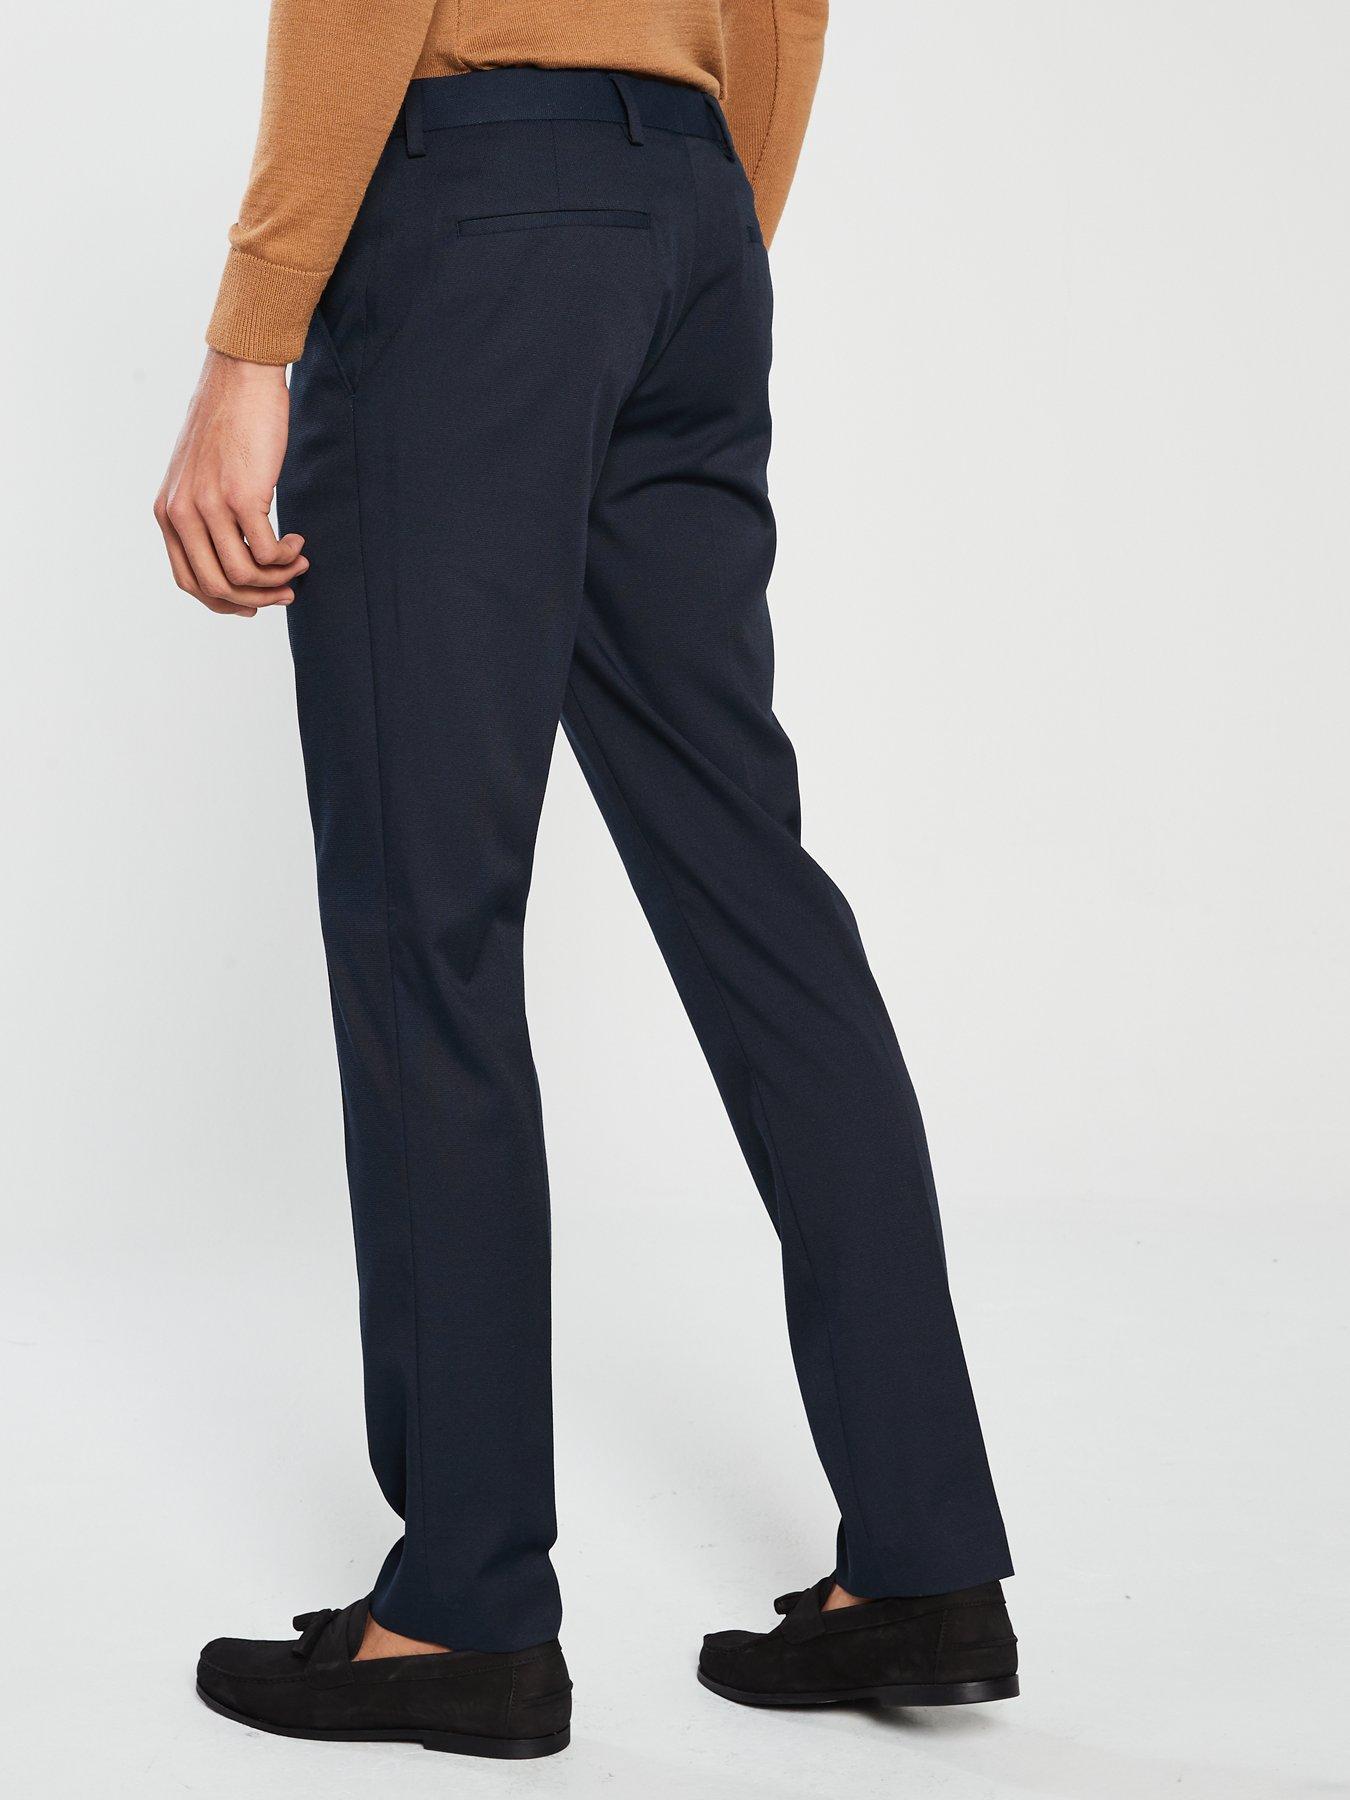 Edward Texture Slim Navy Trousers - fabric texture pants roblox